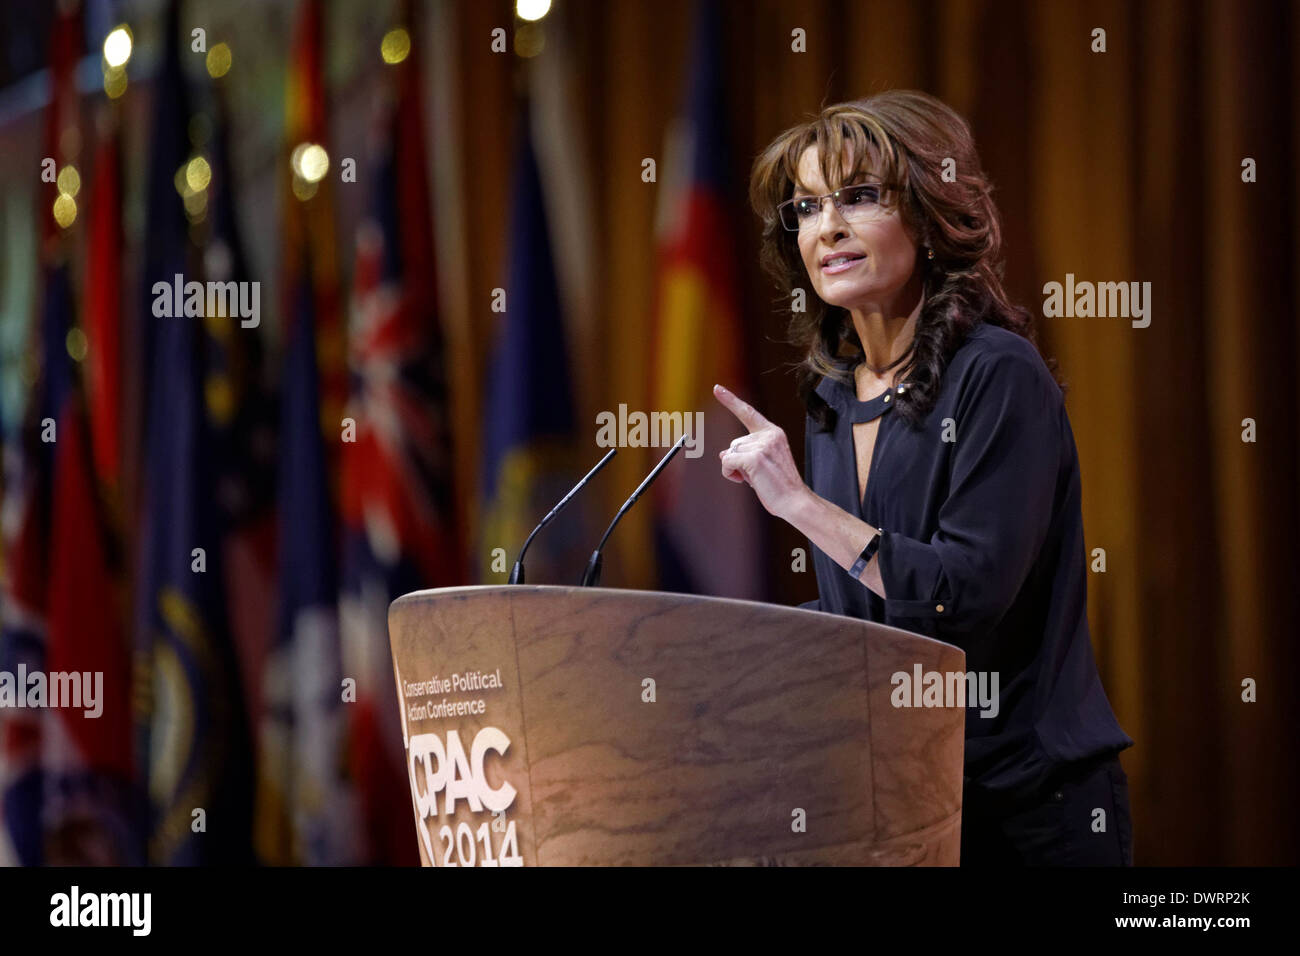 Former Alaska Governor and Tea Party figure Sarah Palin pictured during CPAC 2014 at National Harbor, Maryland. Stock Photo